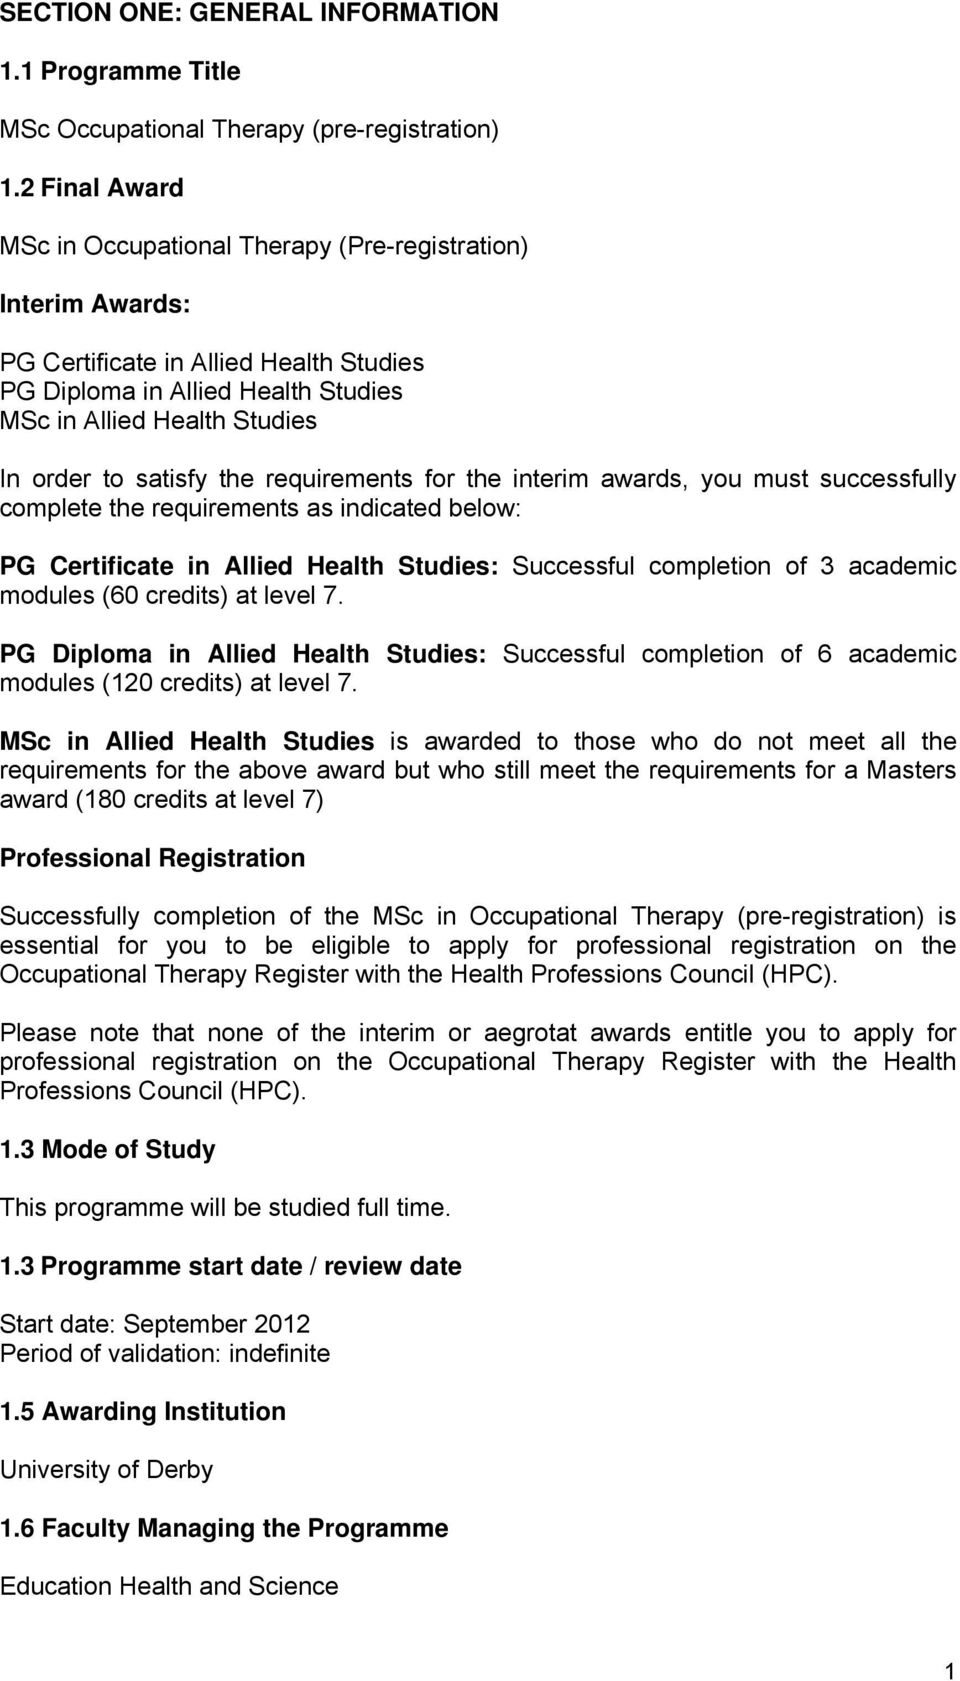 requirements for the interim awards, you must successfully complete the requirements as indicated below: PG Certificate in Allied Health Studies: Successful completion of 3 academic modules (60